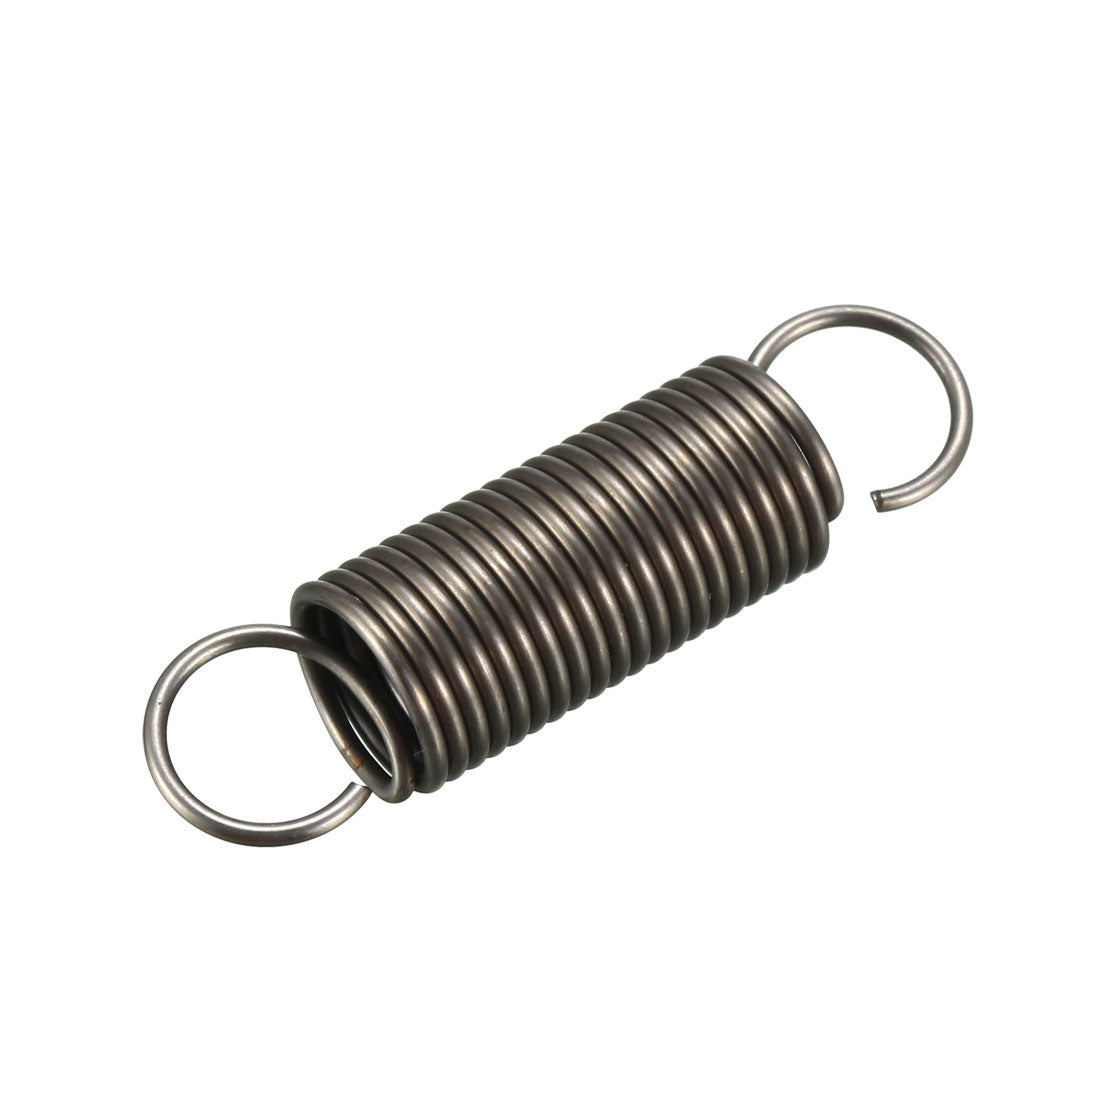 uxcell Uxcell Extended Tension Spring Wire Diameter 0.04", OD 0.39", Free Length 1.57" 10pcs